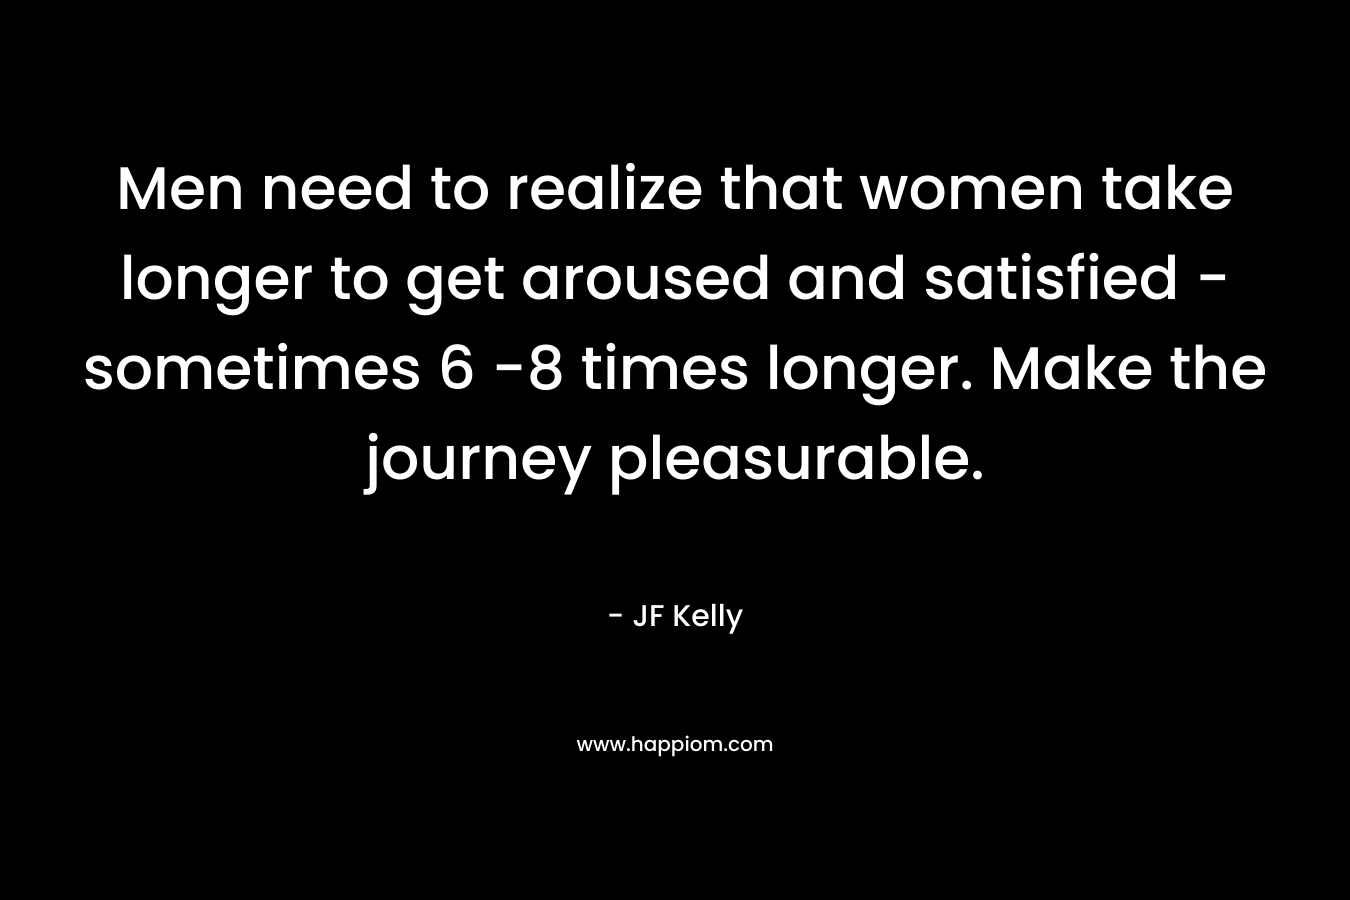 Men need to realize that women take longer to get aroused and satisfied - sometimes 6 -8 times longer. Make the journey pleasurable.